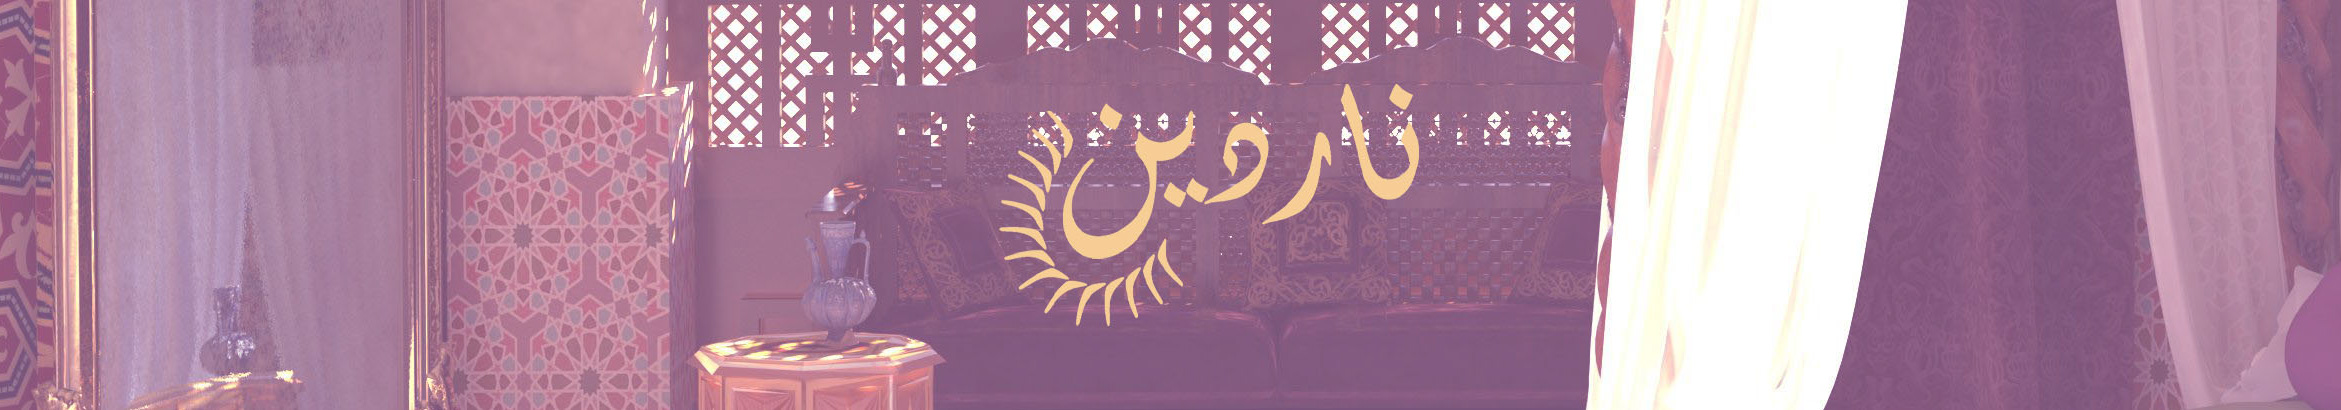 Nardeen Soliman's profile banner